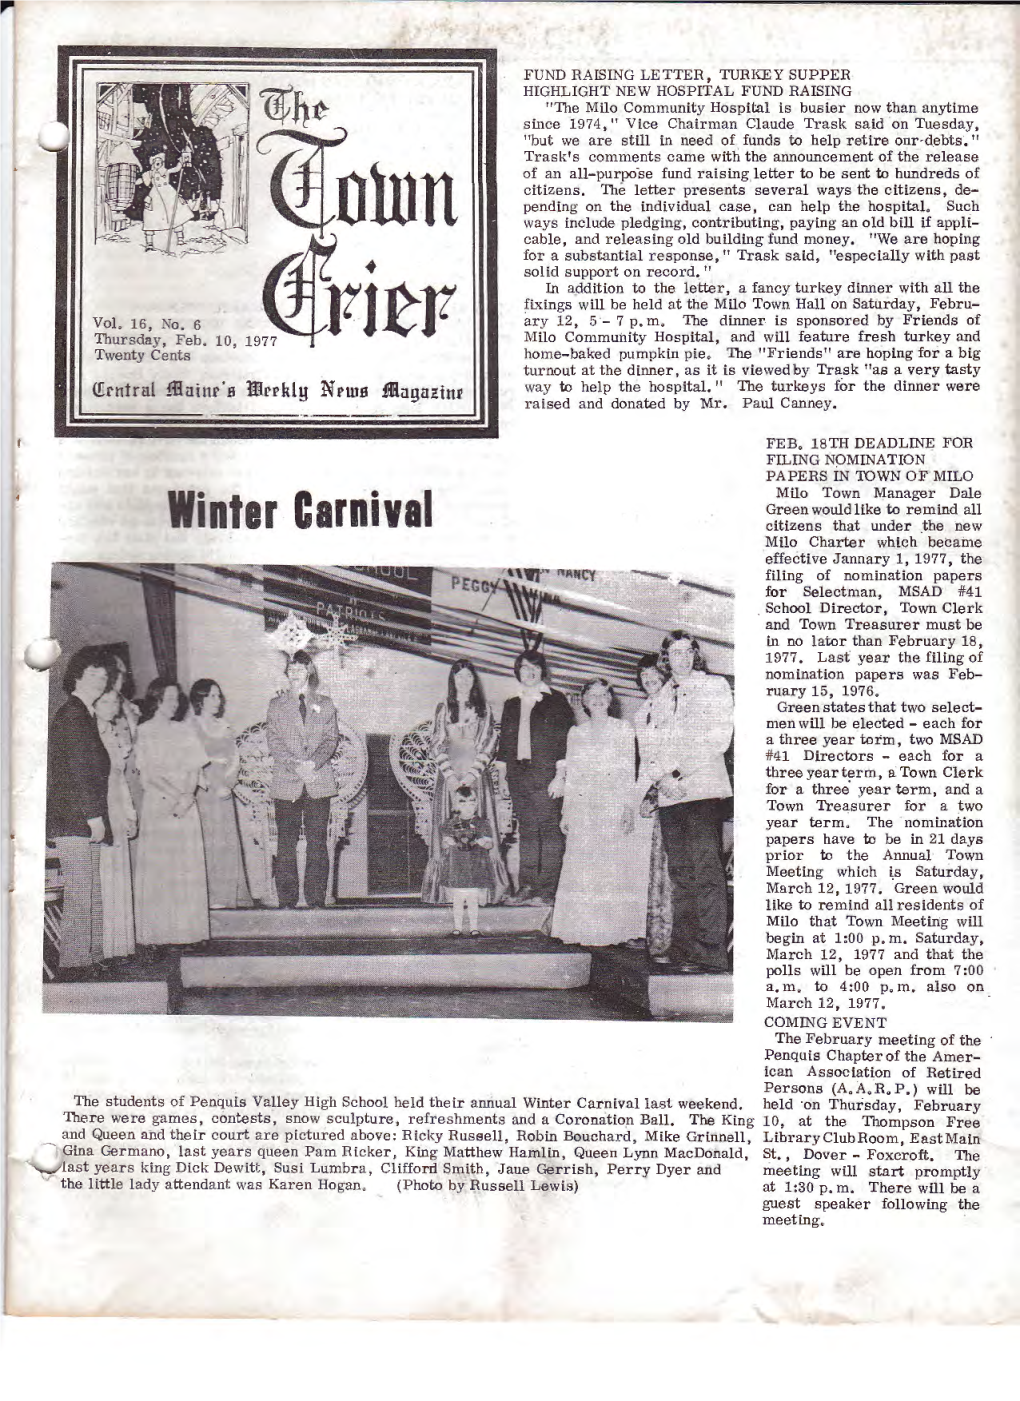 Winter Carnival Citizens That Under .The New Milo Charter Which Becai:Ne Effective January 1, 1977, the Filing of Nomination Papers for Selectman, MSAD #41